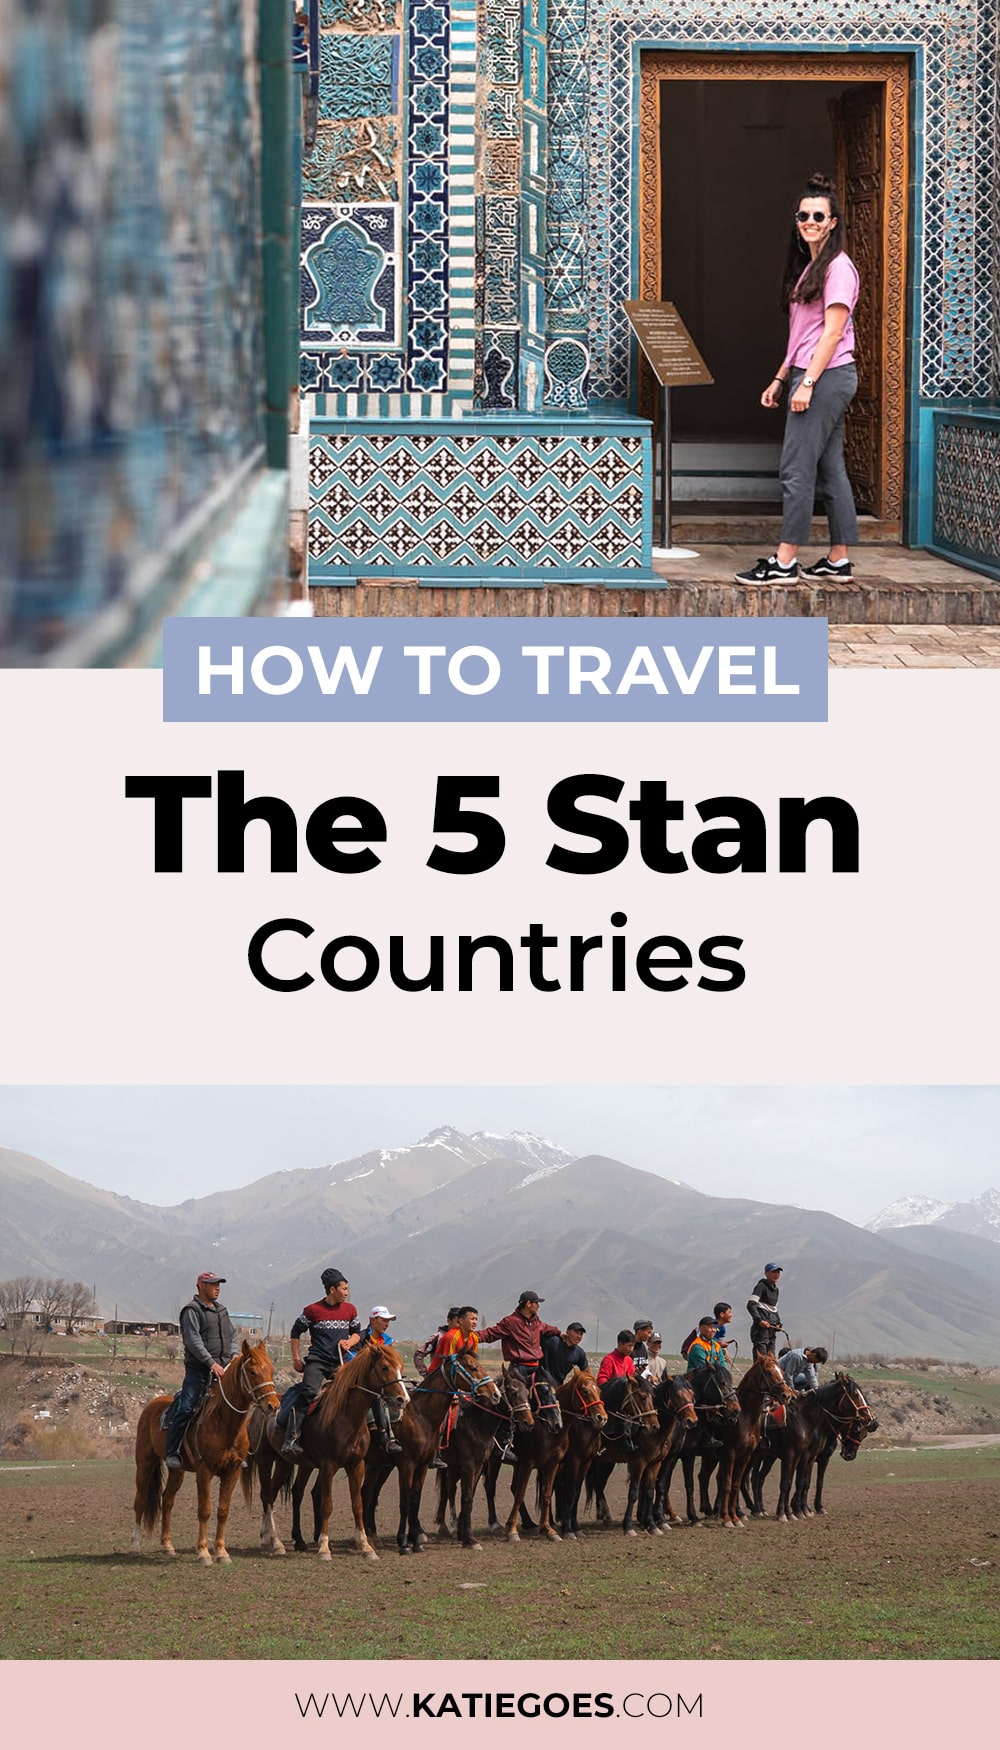 How to Travel the 5 Stan Countries